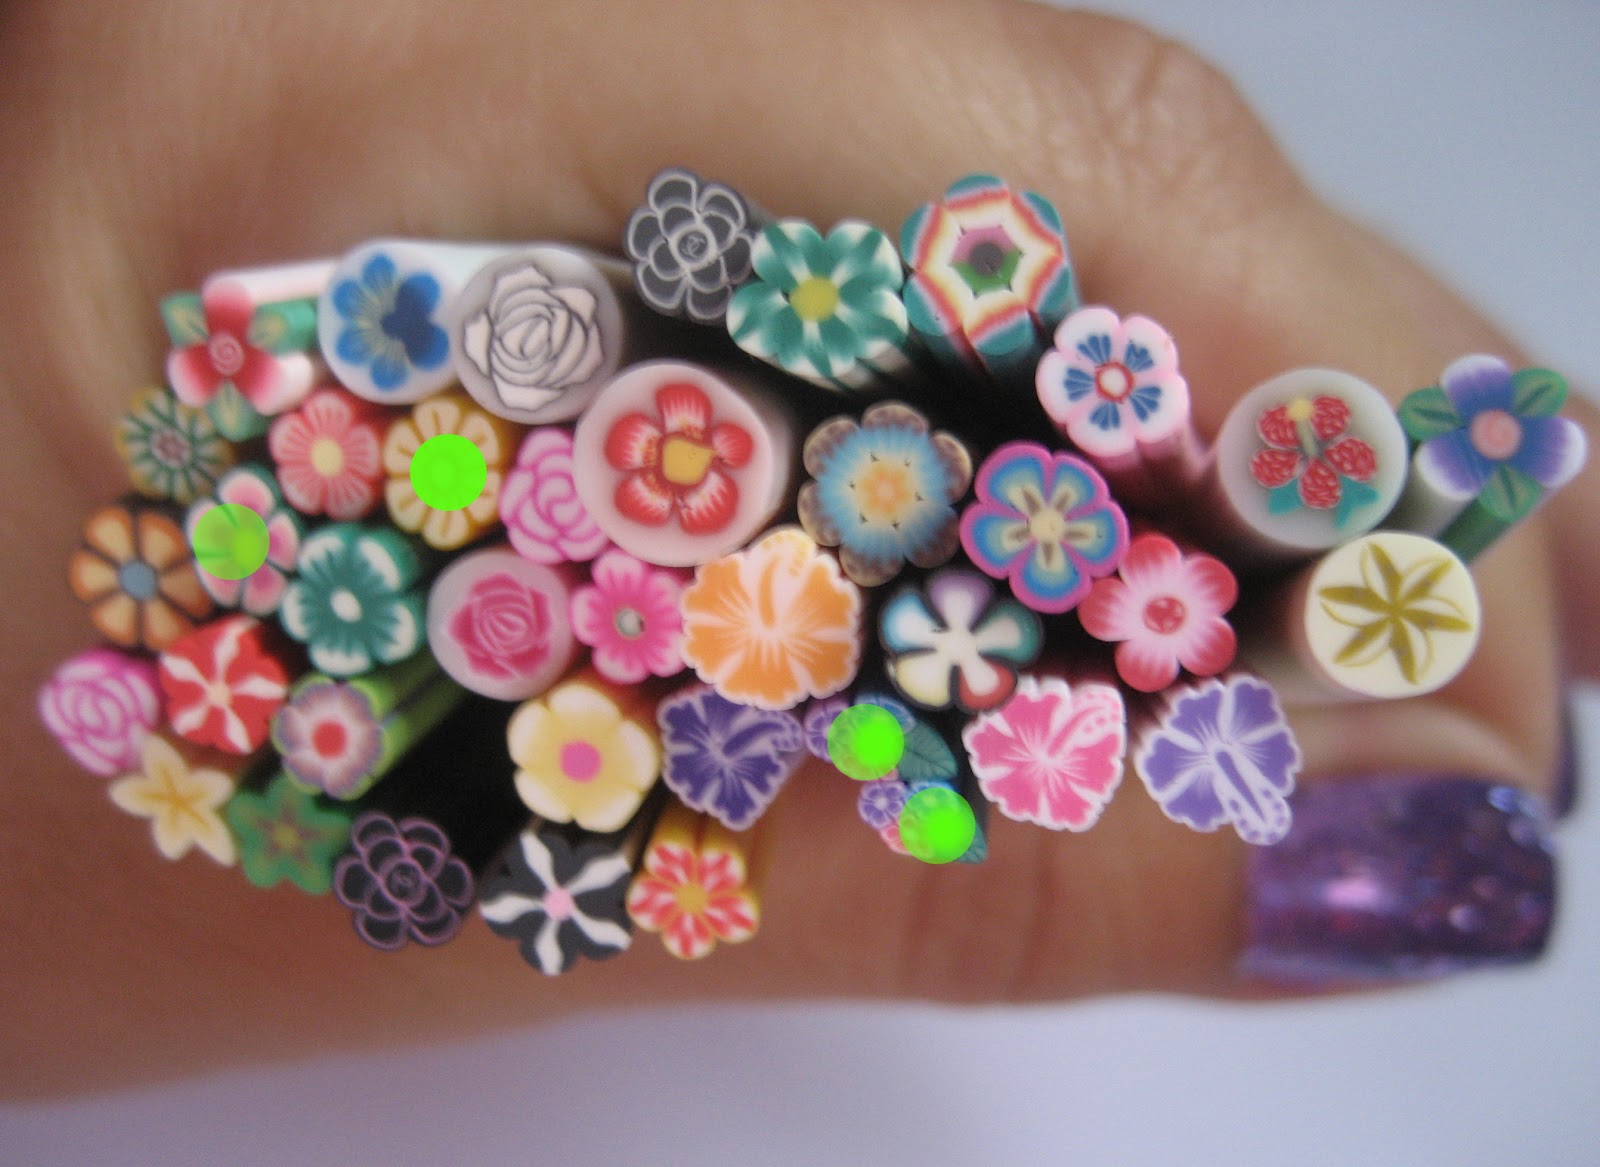 3. Fimo Nail Art Stickers - Floral Designs - wide 6